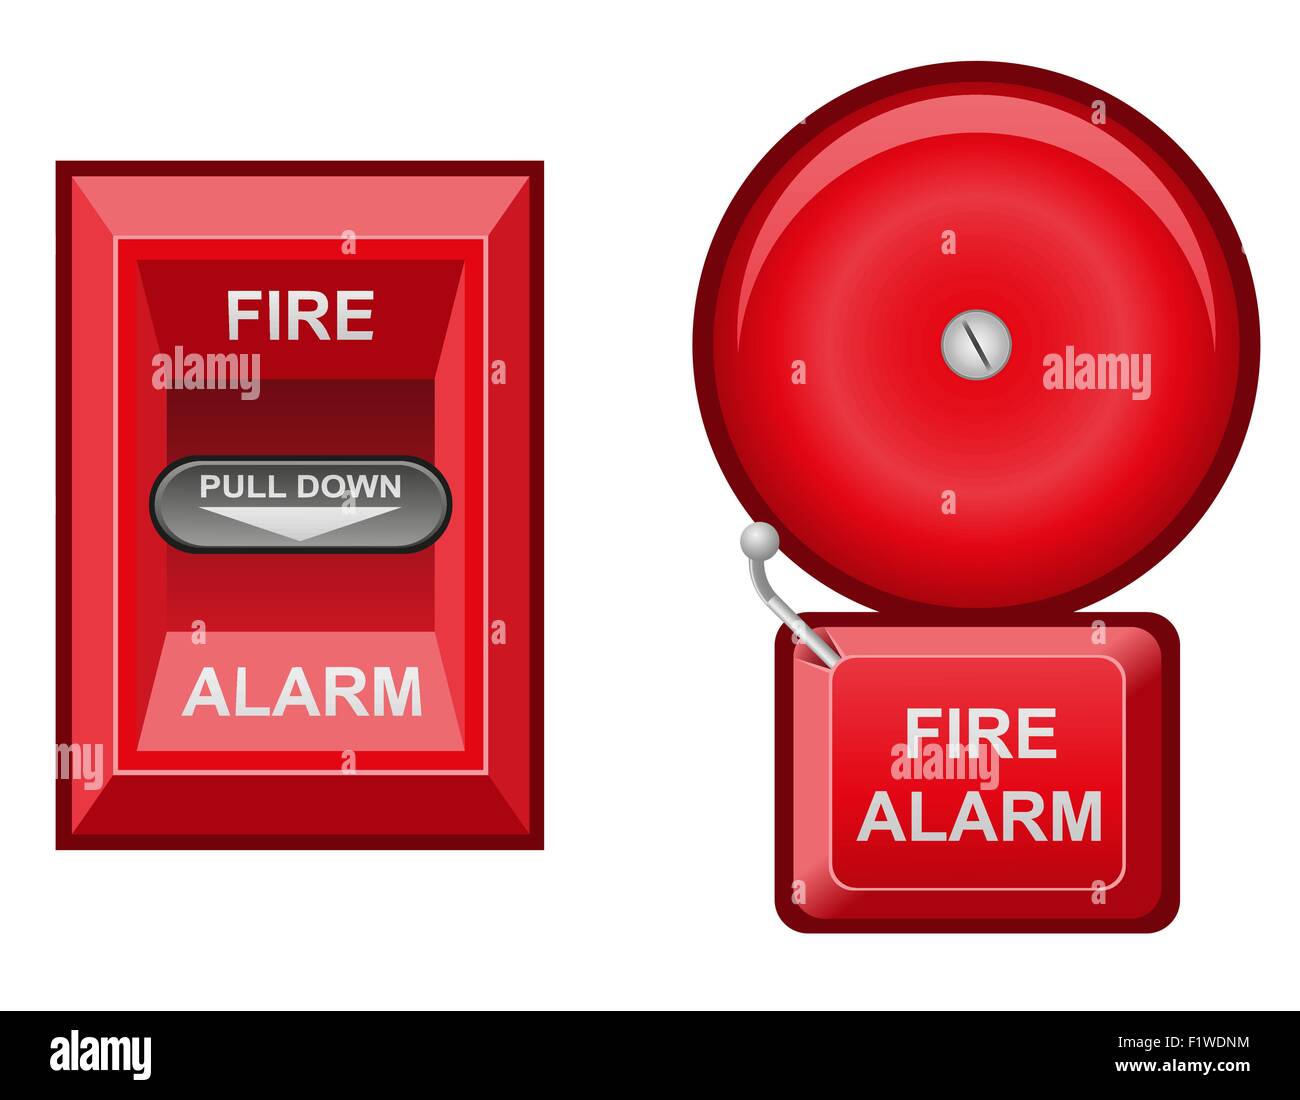 fire alarm vector illustration isolated on white background Stock Vector